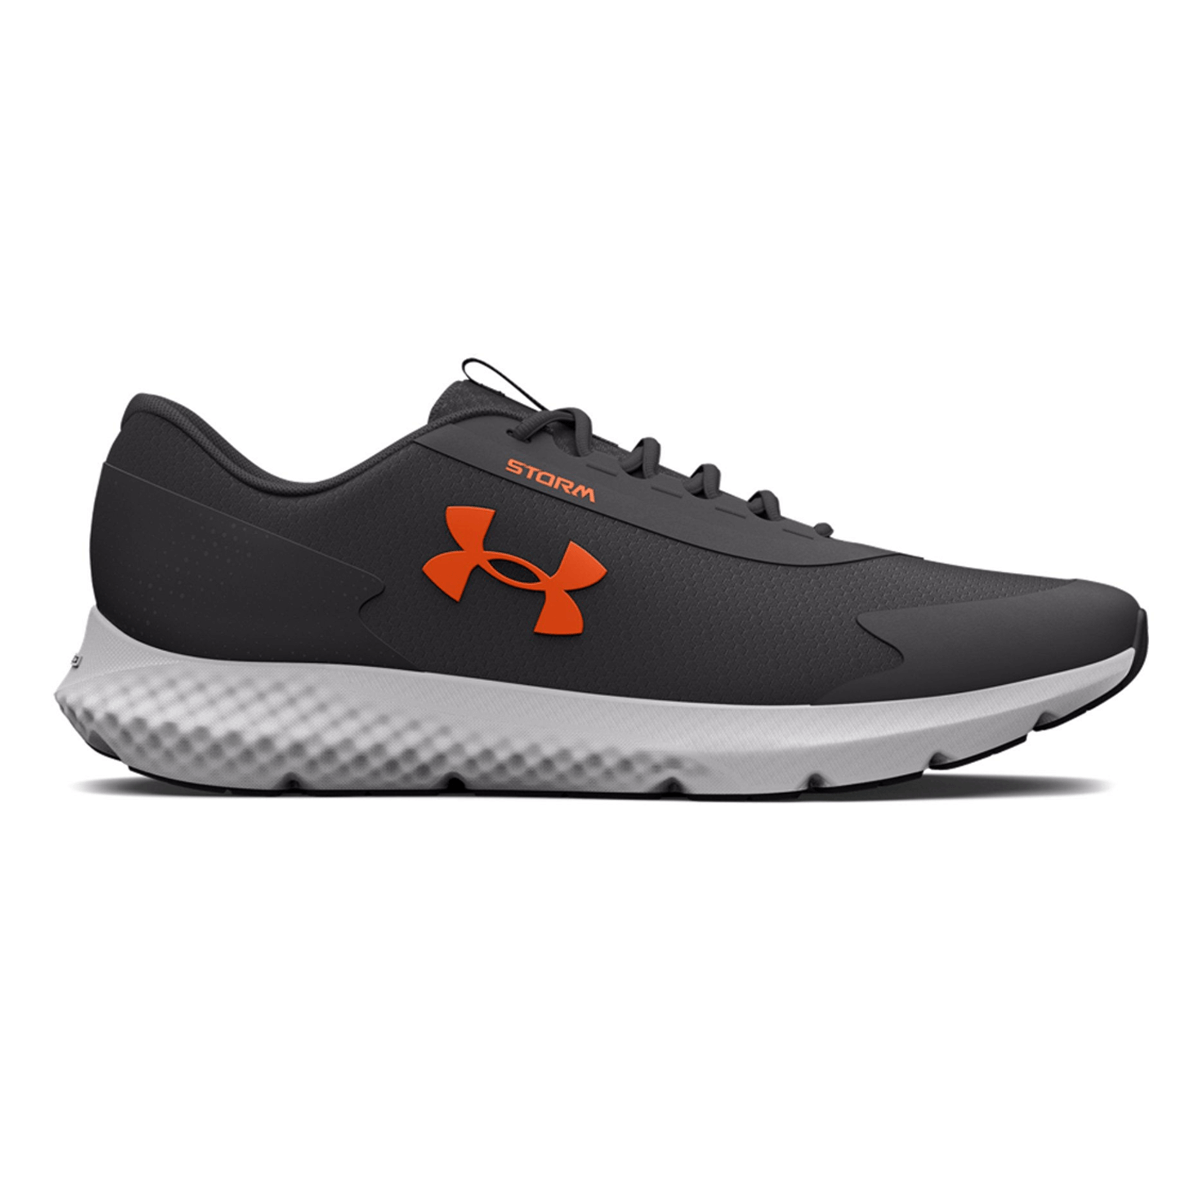 Under Armour Charged Rogue 3 Storm 3025523-101